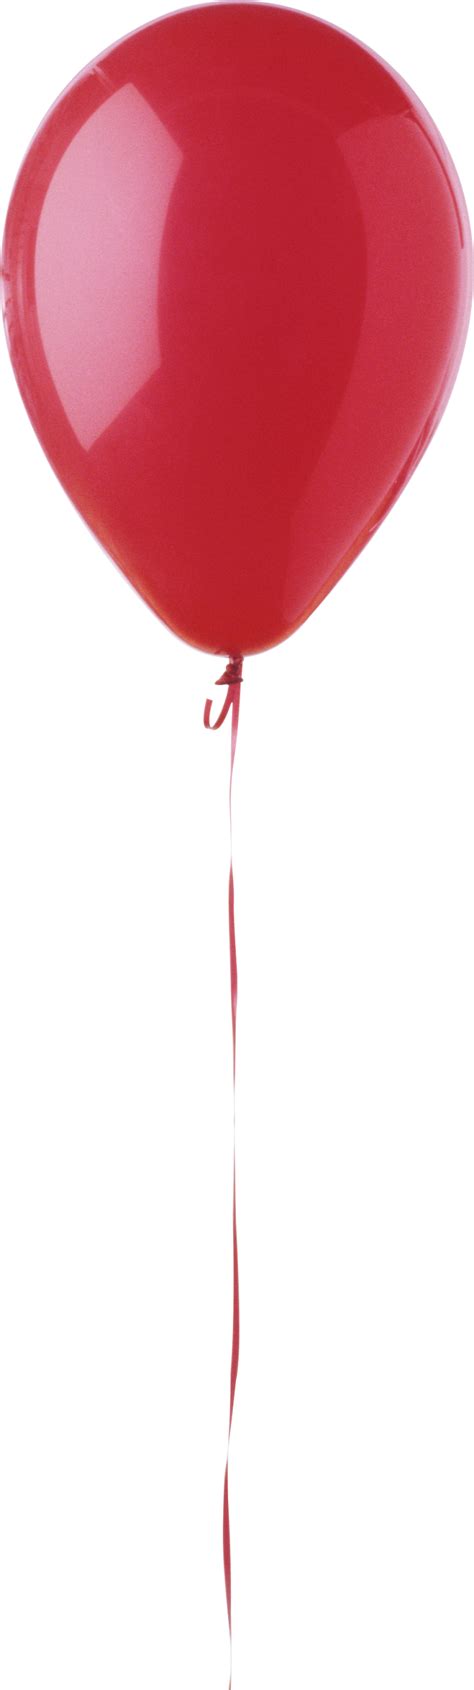 Balloon Red Png Image Purepng Free Transparent Cc0 Png Image Library